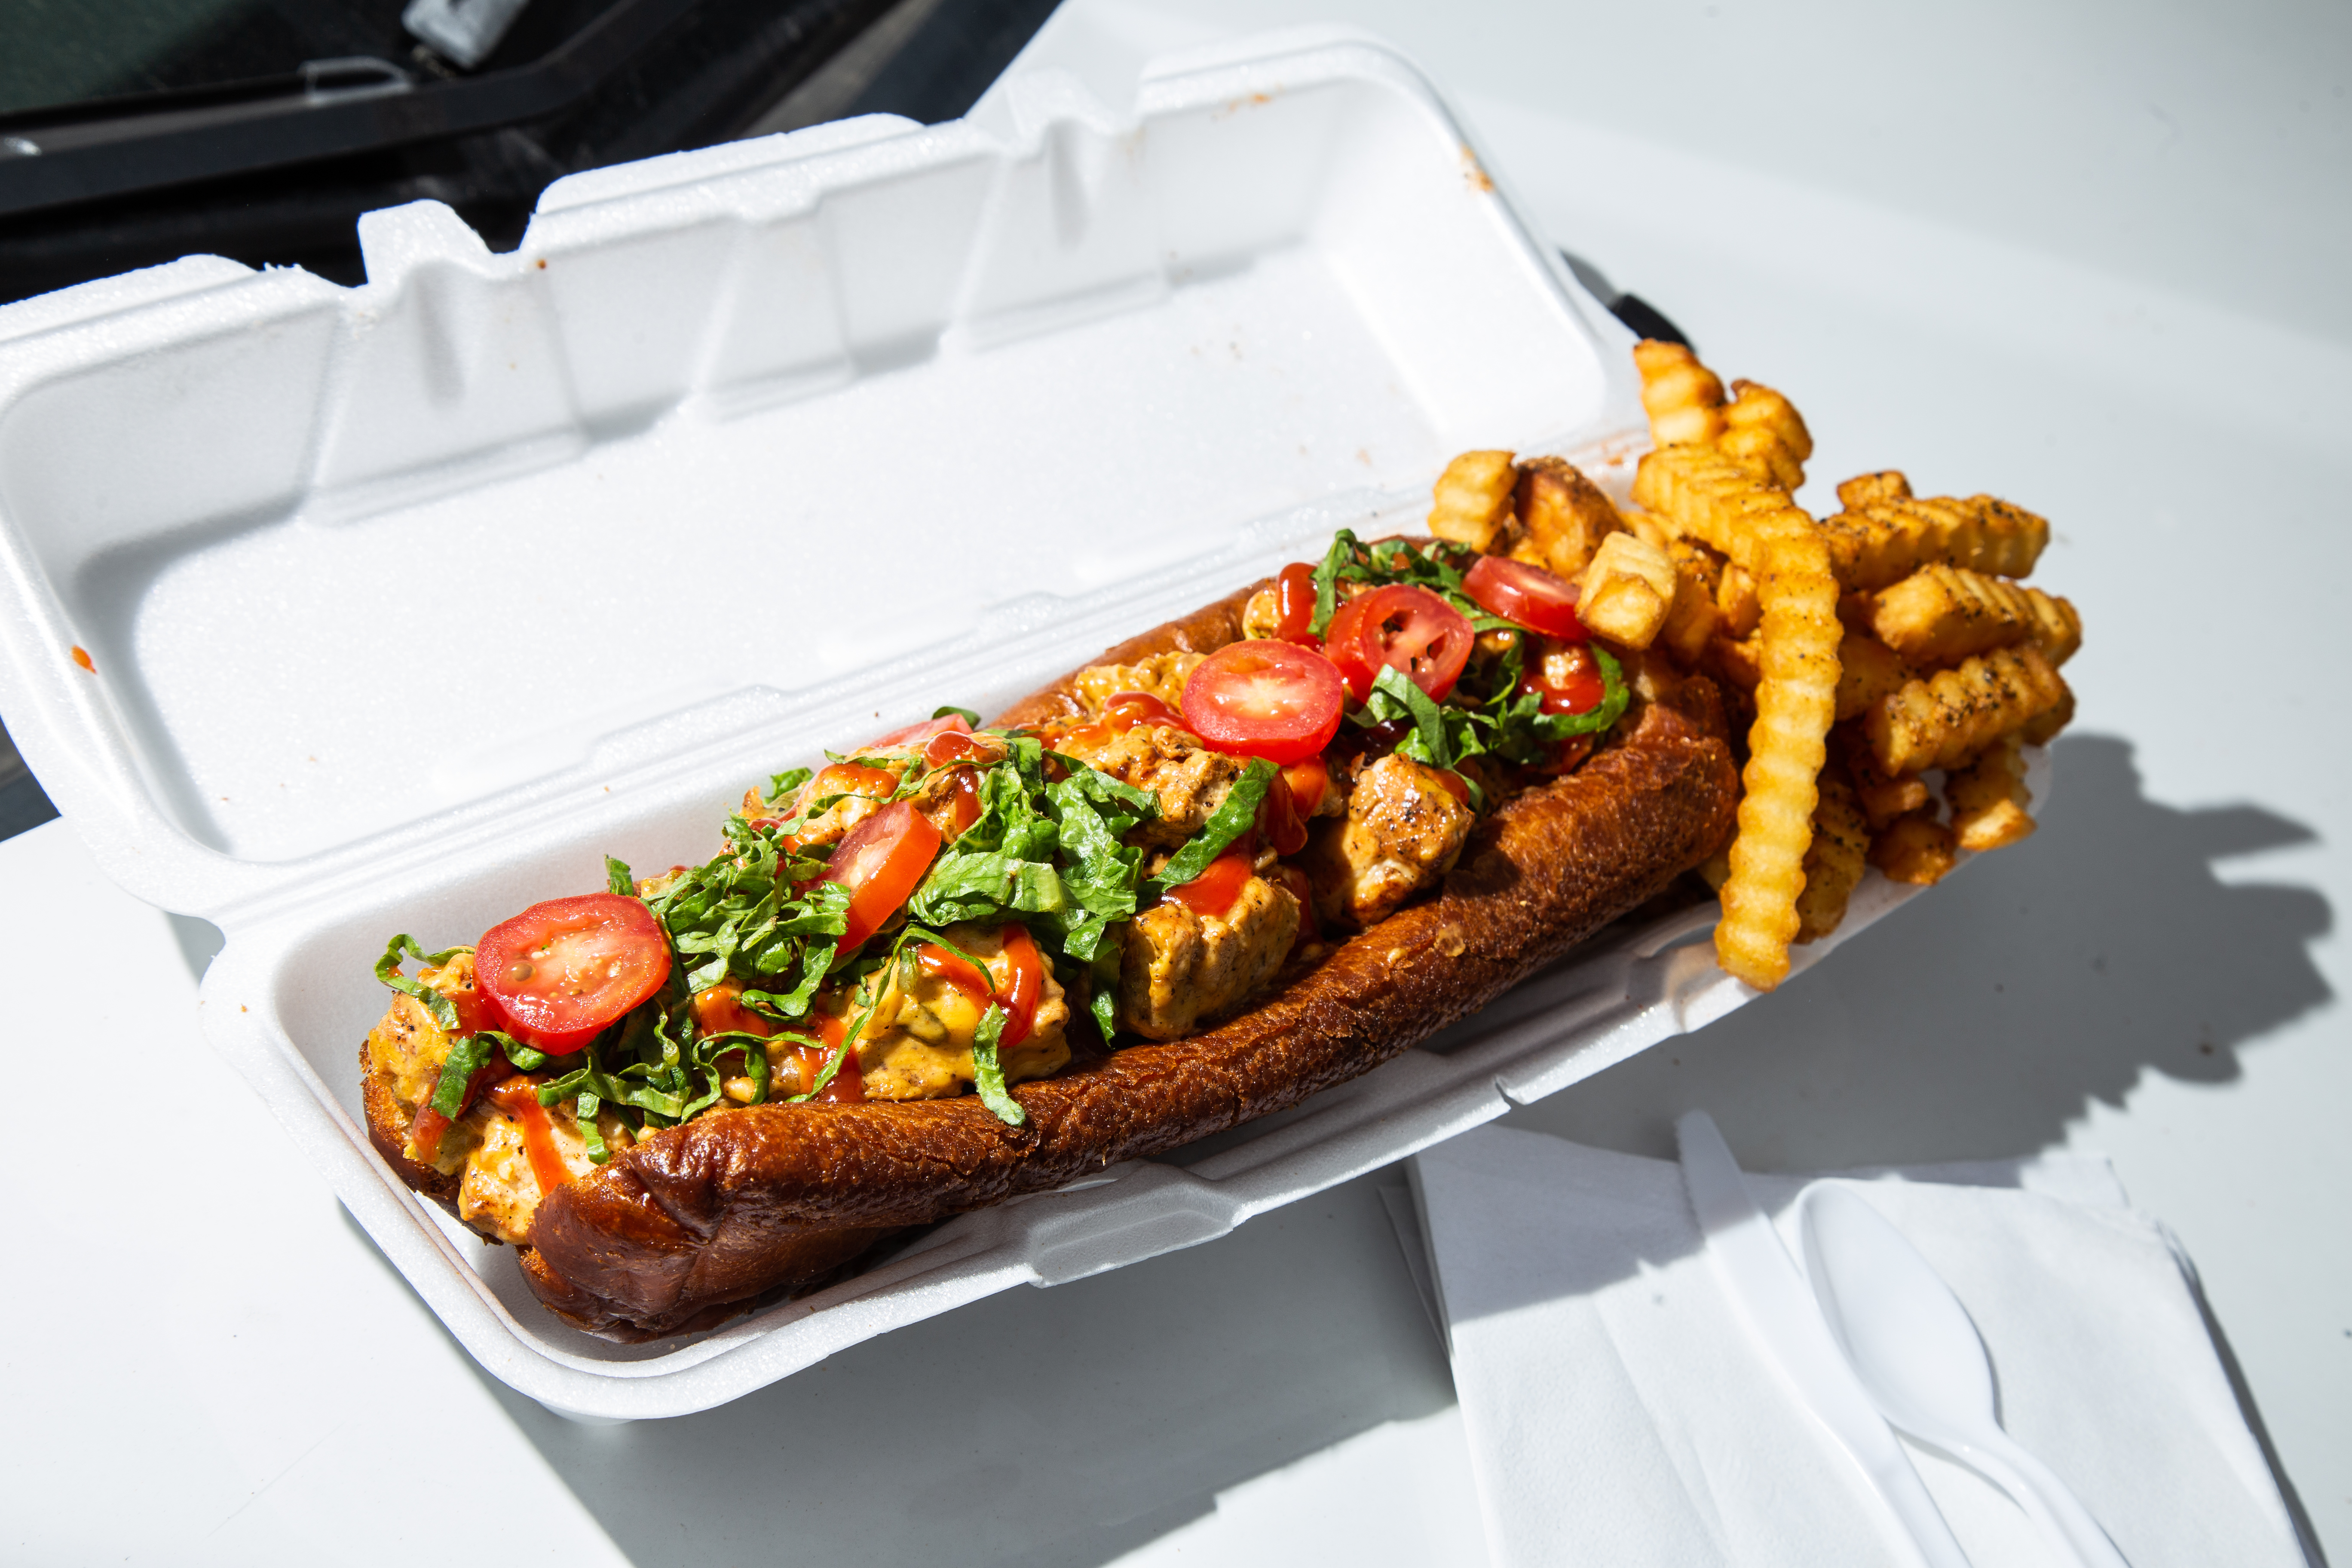 a deep fried chicken cheesesteak with cherry tomatoes, lettuce, special sauce, and crinkle fries in a styrofaum container